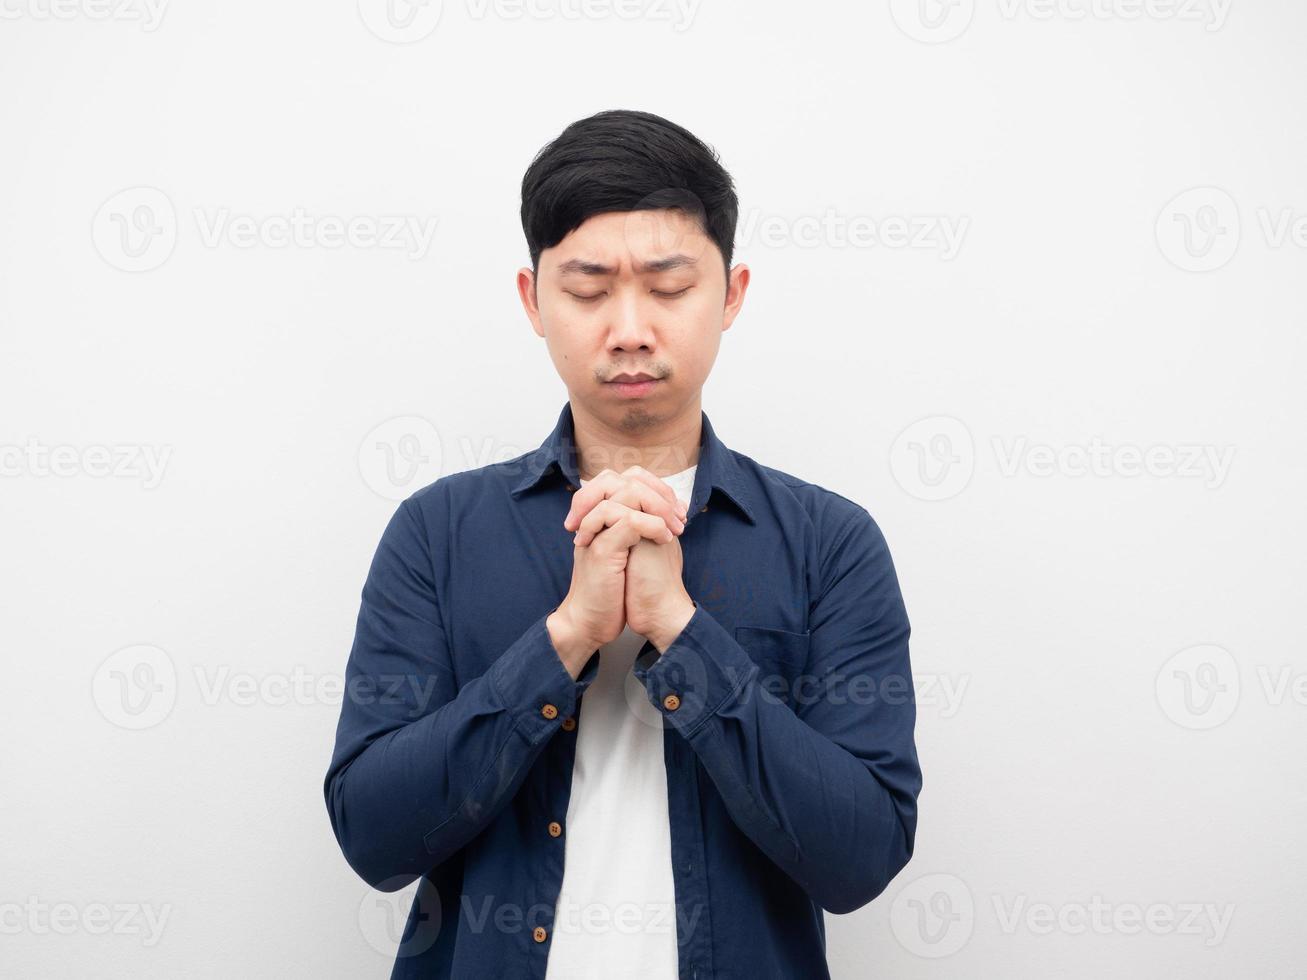 Man gesture praying hand for wish to peaceful photo